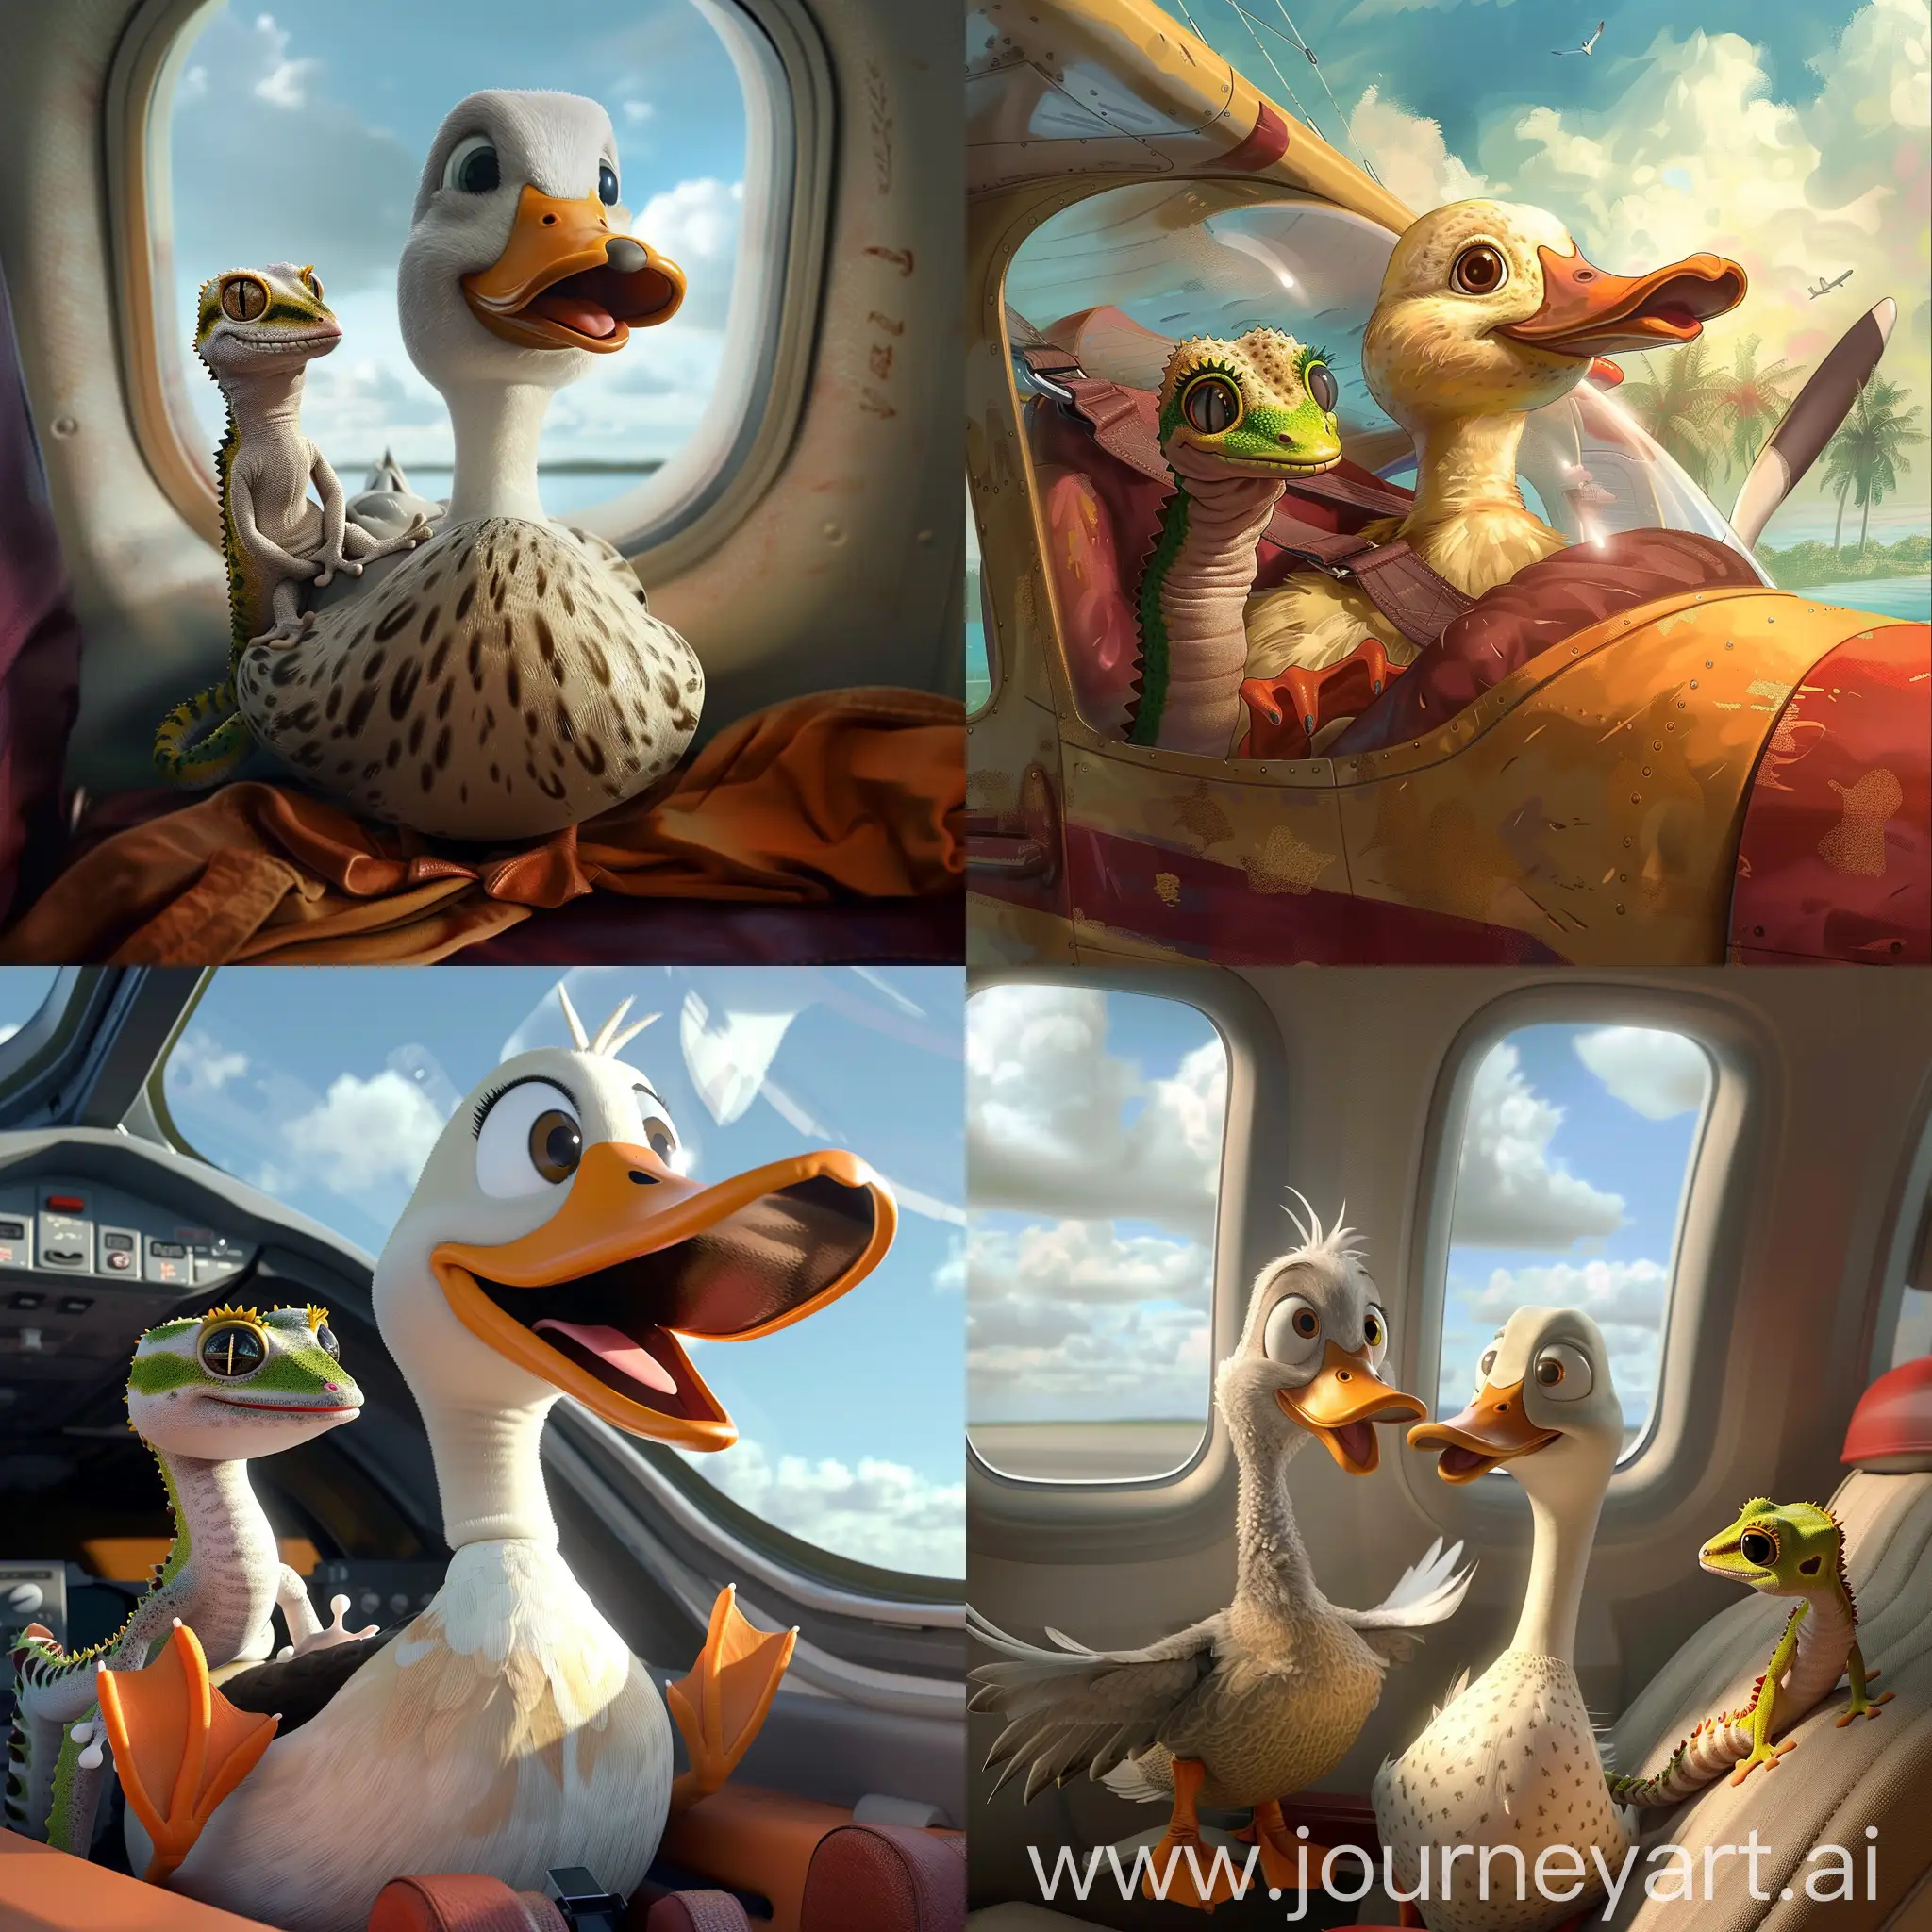 Duck-and-Gecko-Flying-Together-in-a-Colorful-Airplane-Adventure